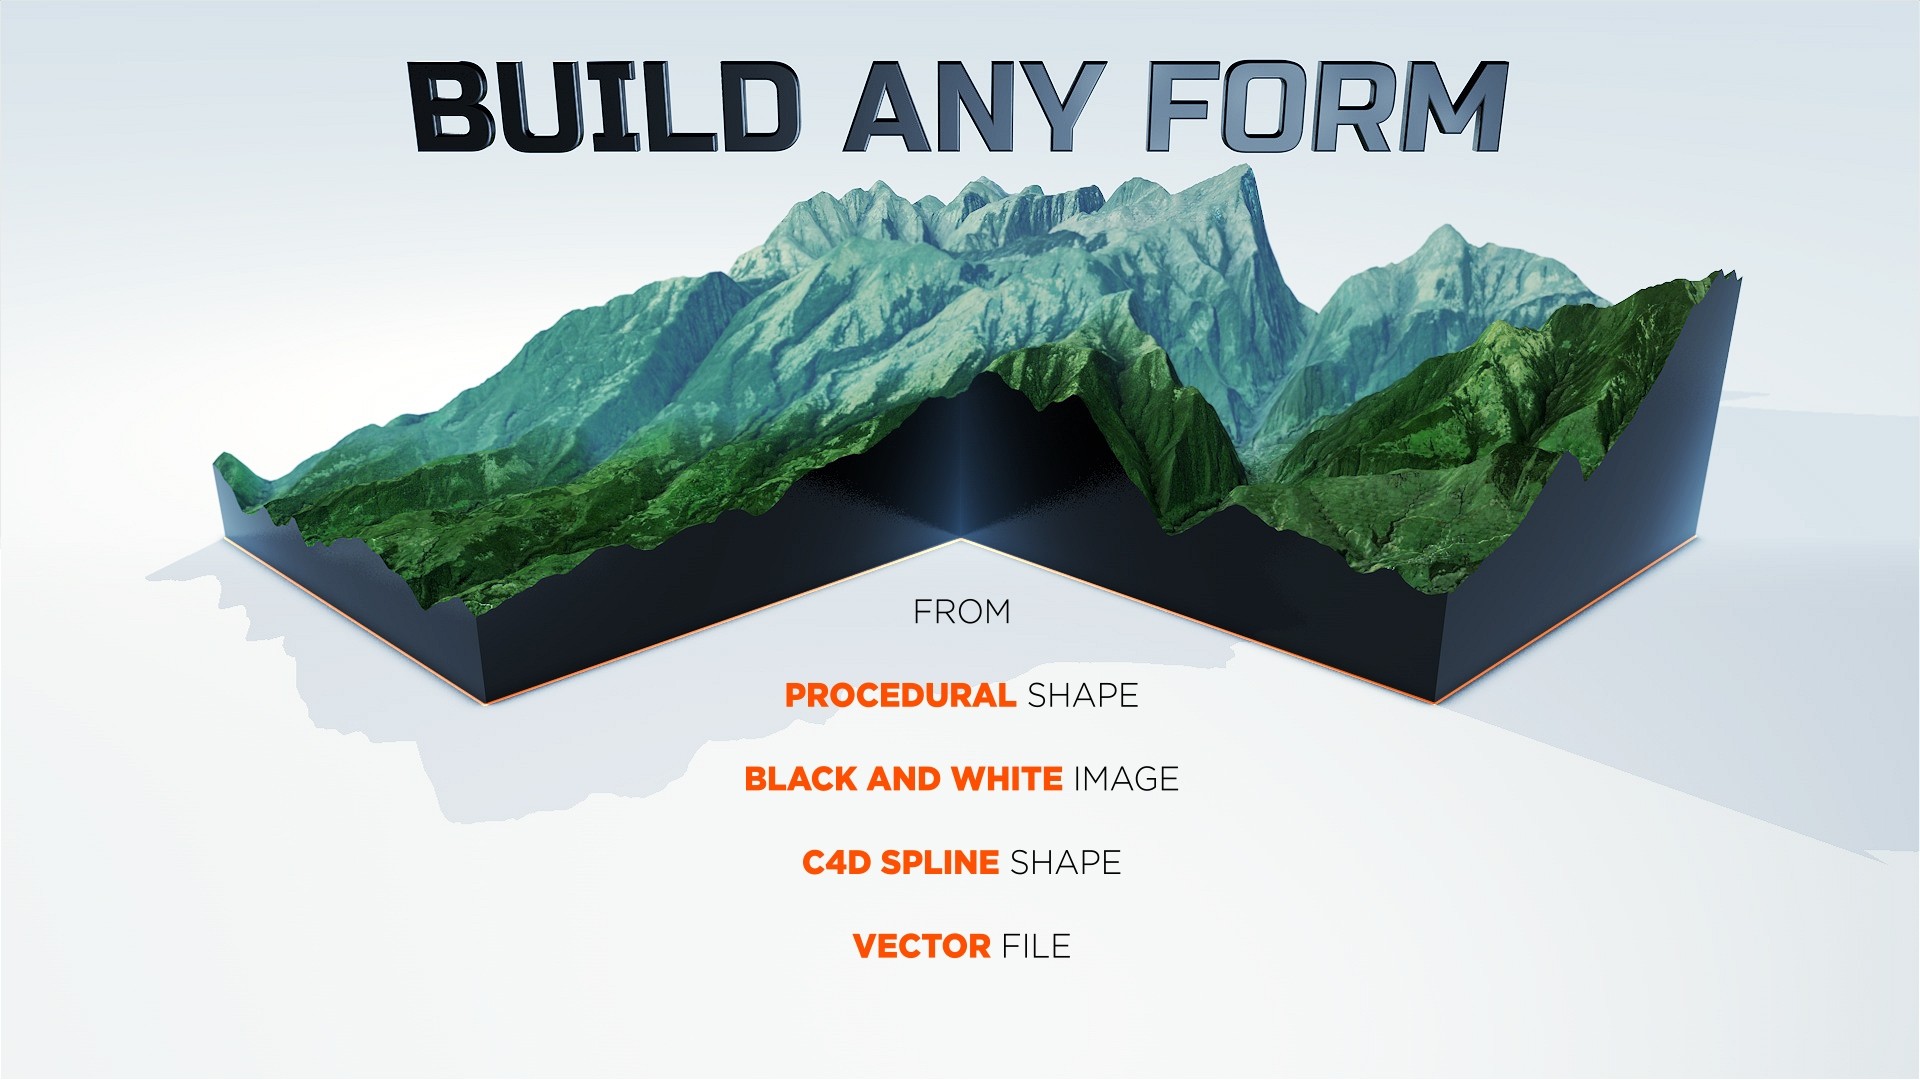 Build any form from procedural shape, black and white image, c4d spline, vector file